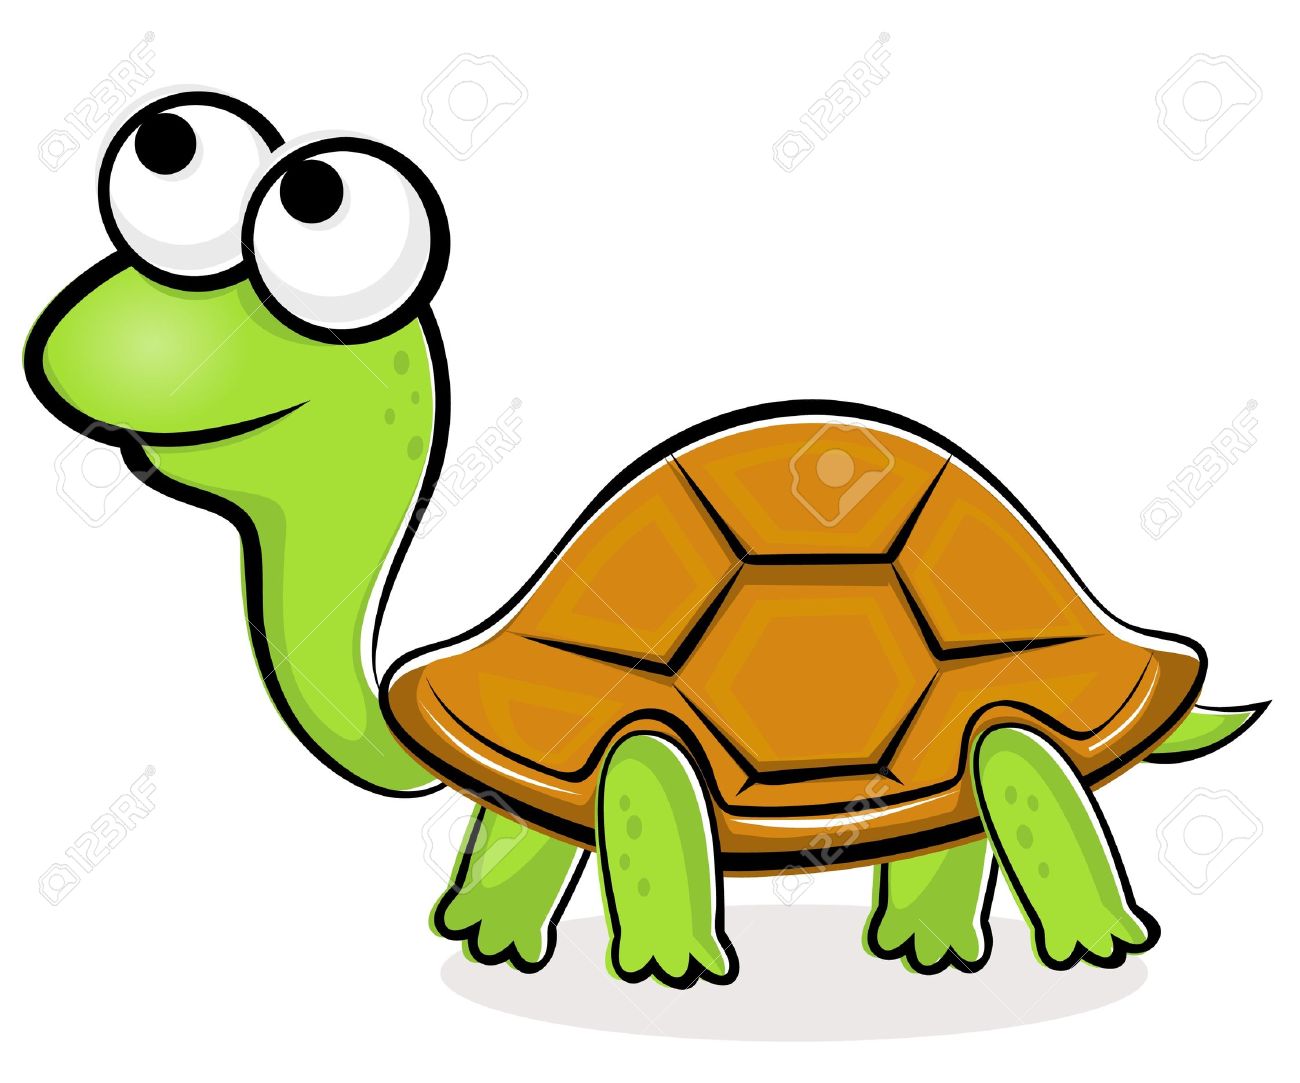 Tortoise clipart #11, Download drawings